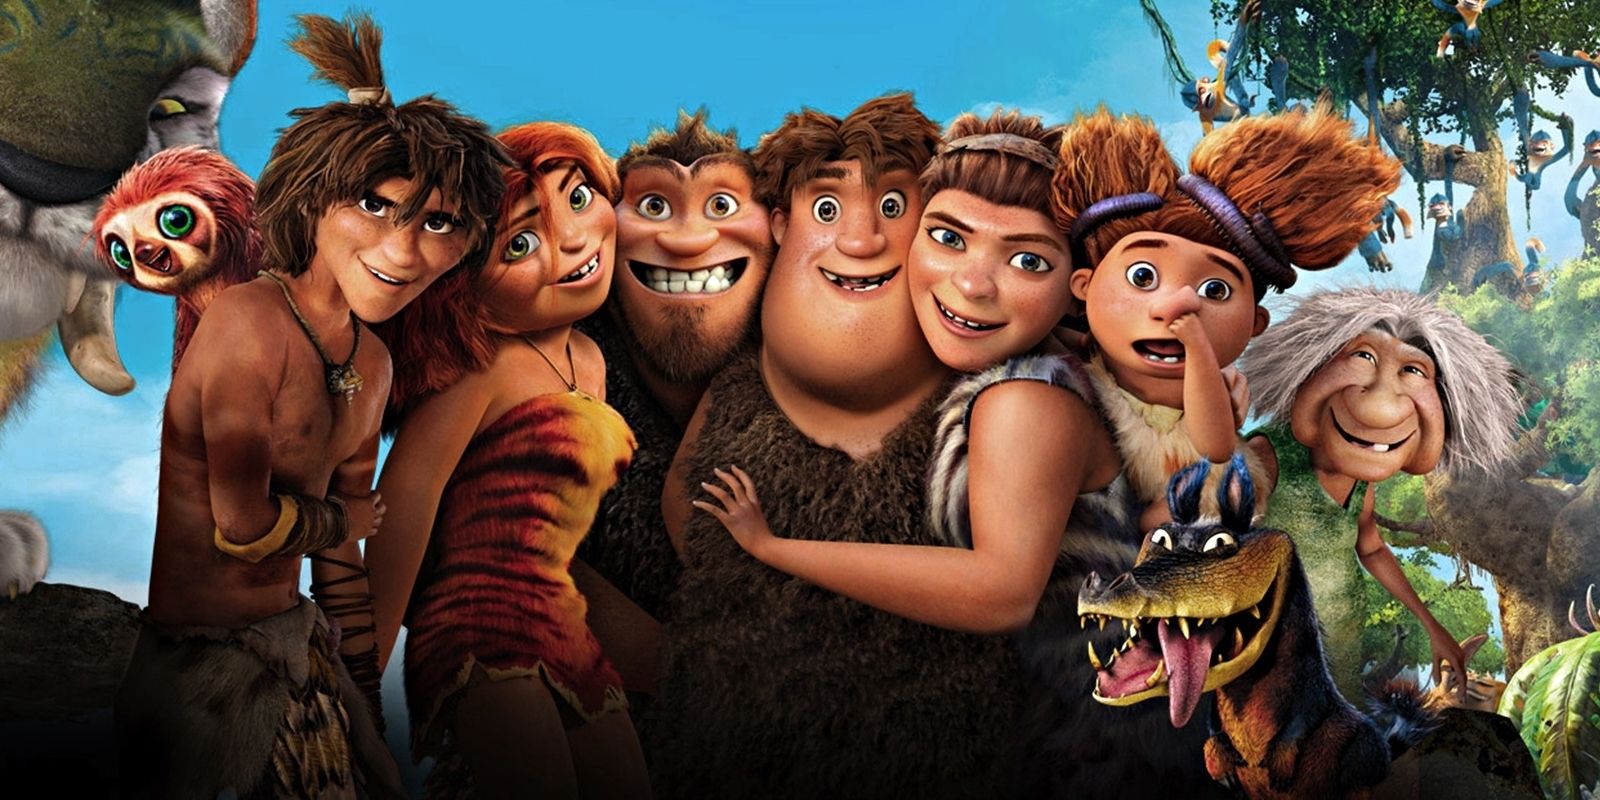 2. The Croods - wide 9